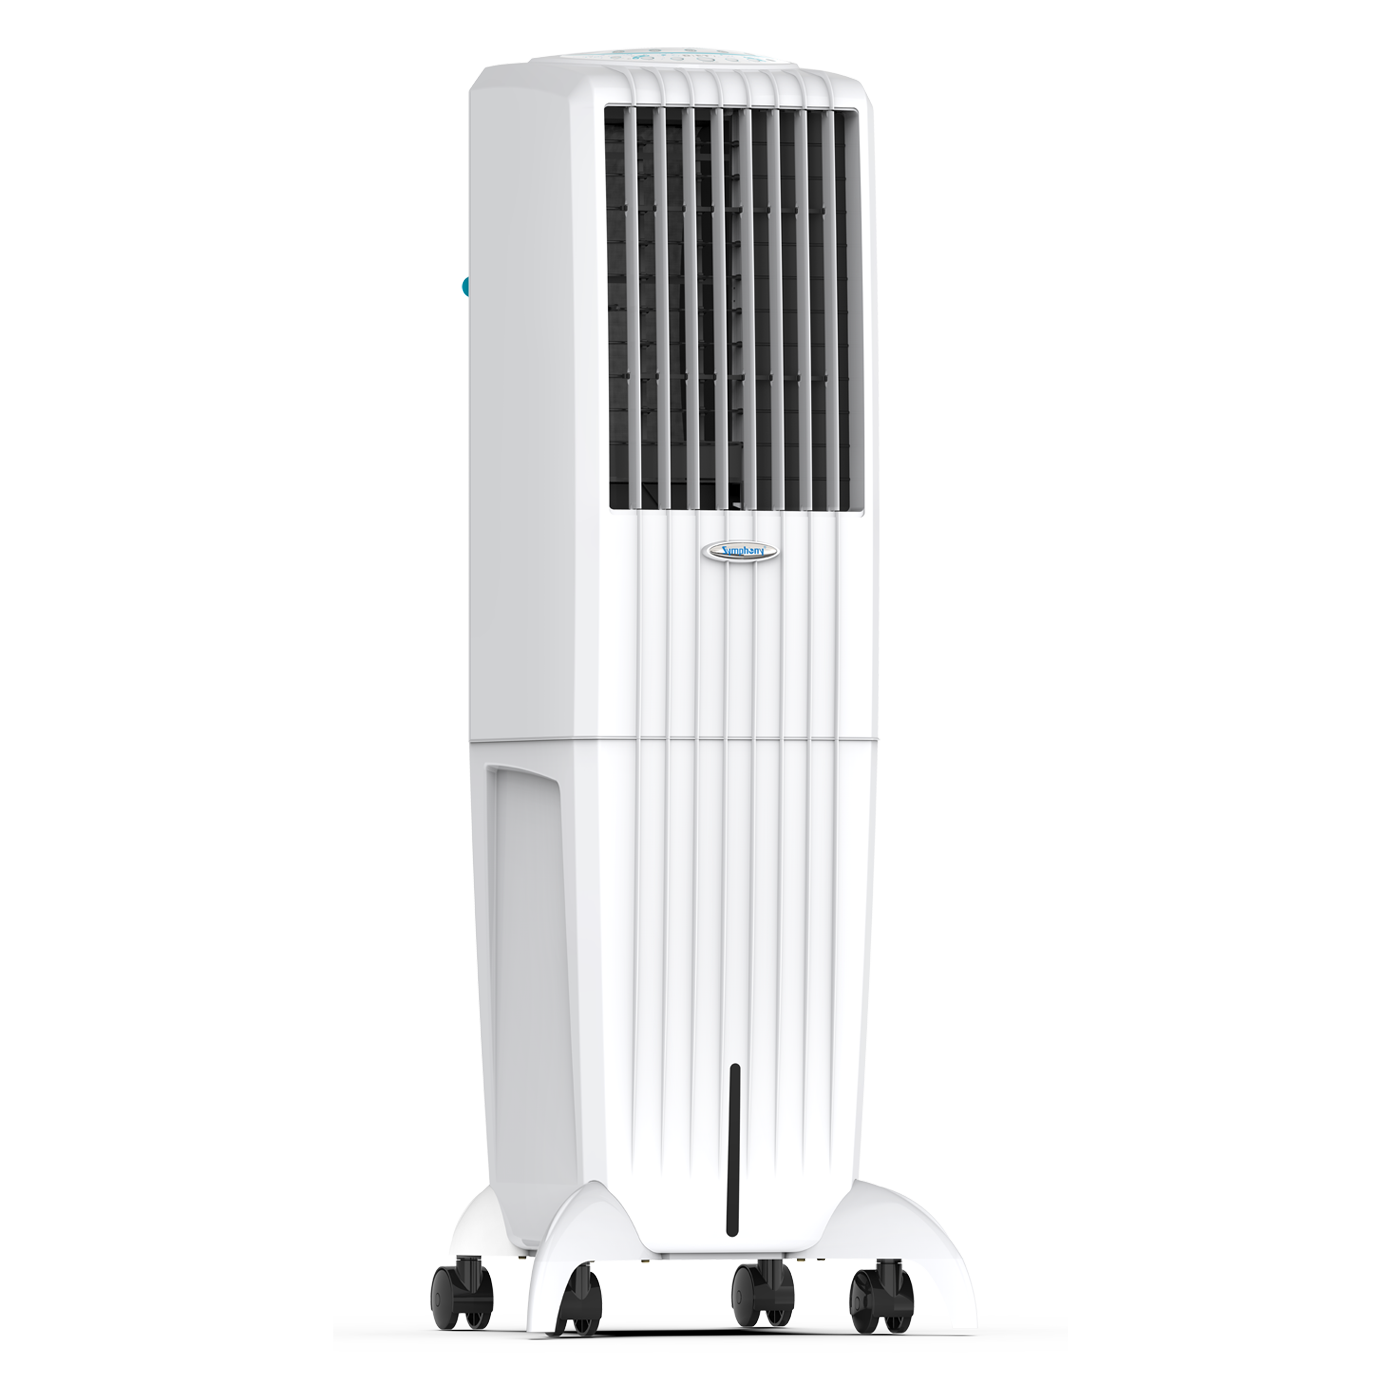 Diet 35i - Room Air Cooler for Medium Space Up to 15 Sq Mt.